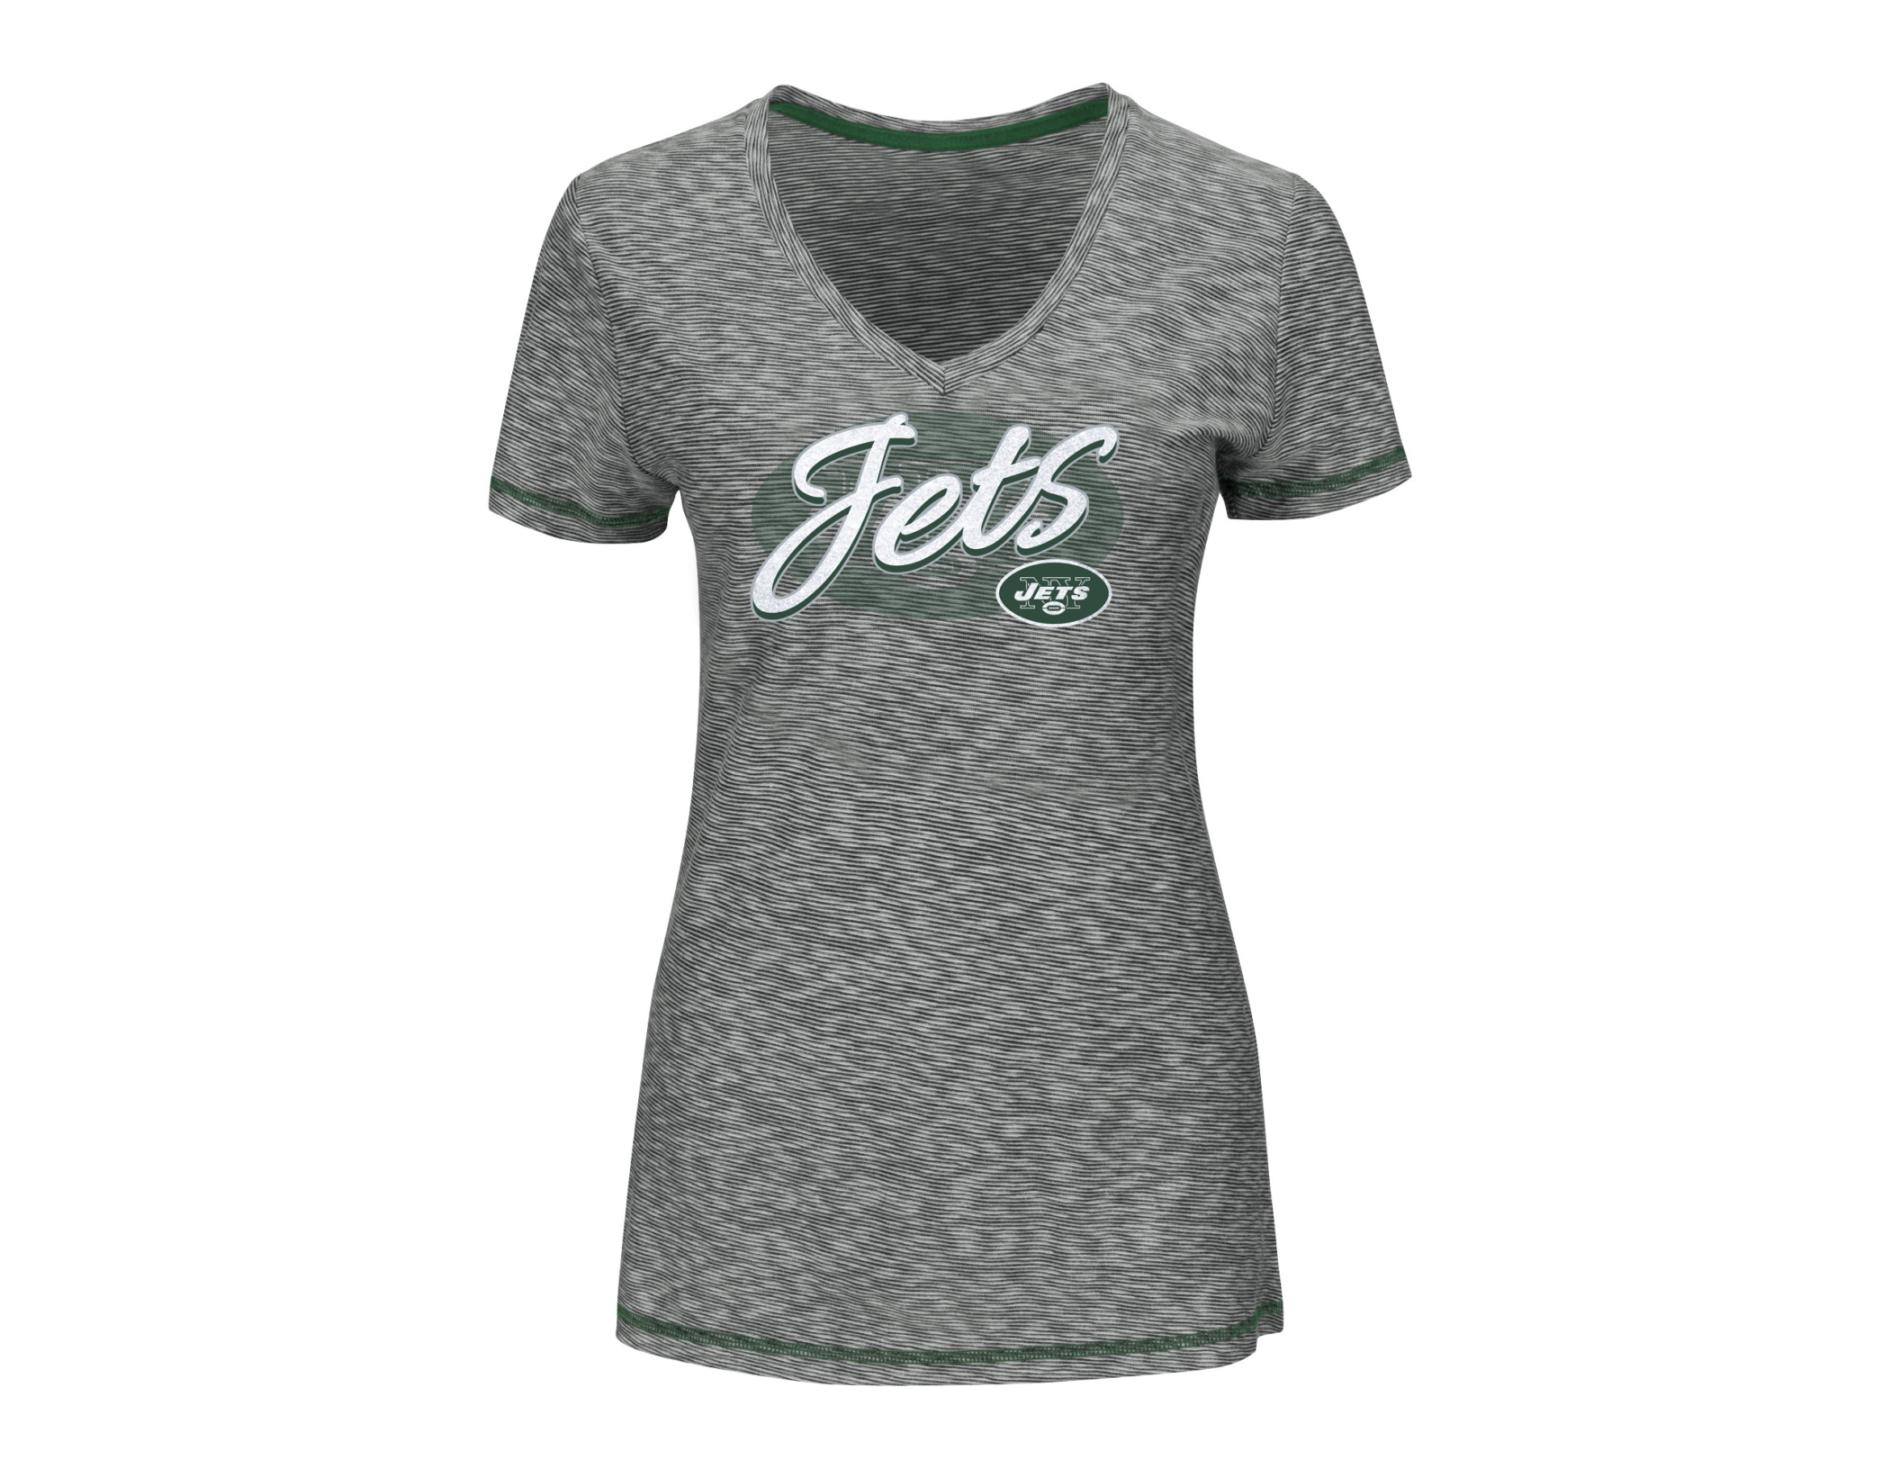 NFL Women's Ribbed Graphic T-Shirt - New York Jets